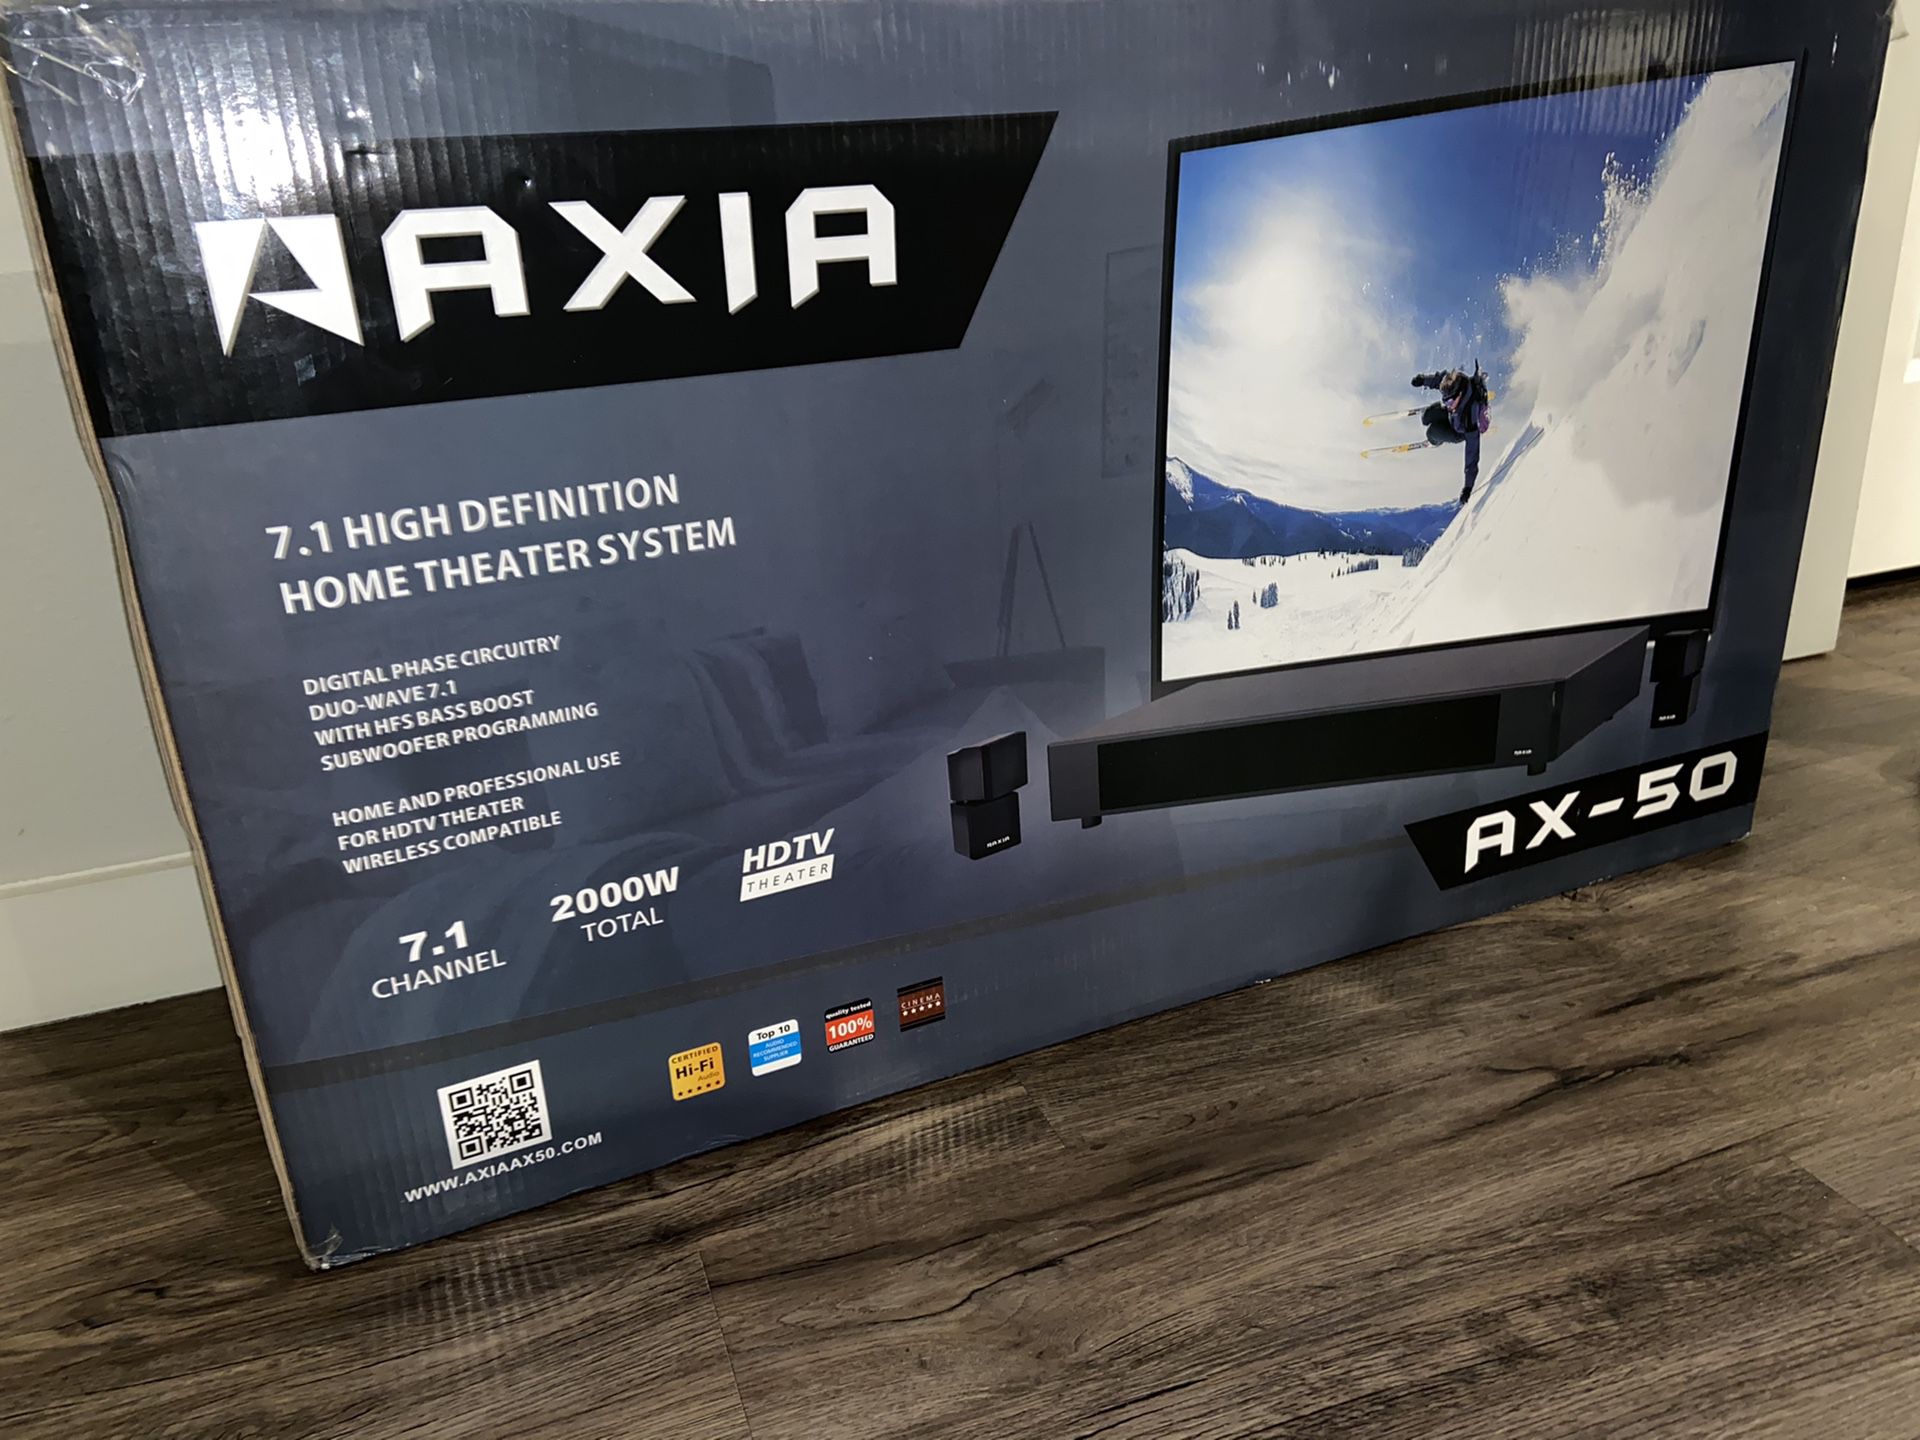 Home theater system Axia AX-50